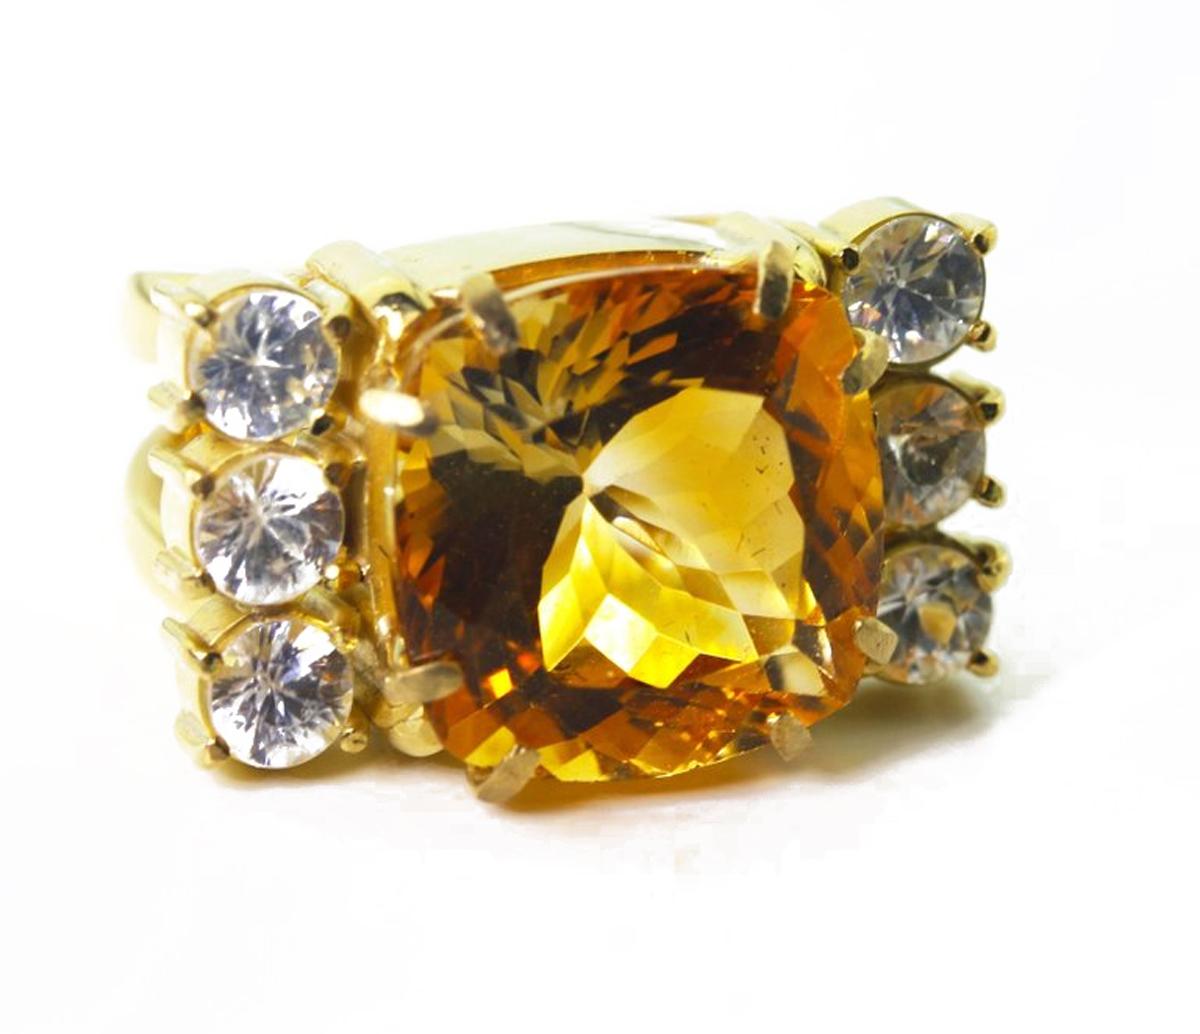 AJD Very Hollywood 11.5 Carat Golden Citrine & Sapphire 18Kt Gold Cocktail Ring For Sale 1